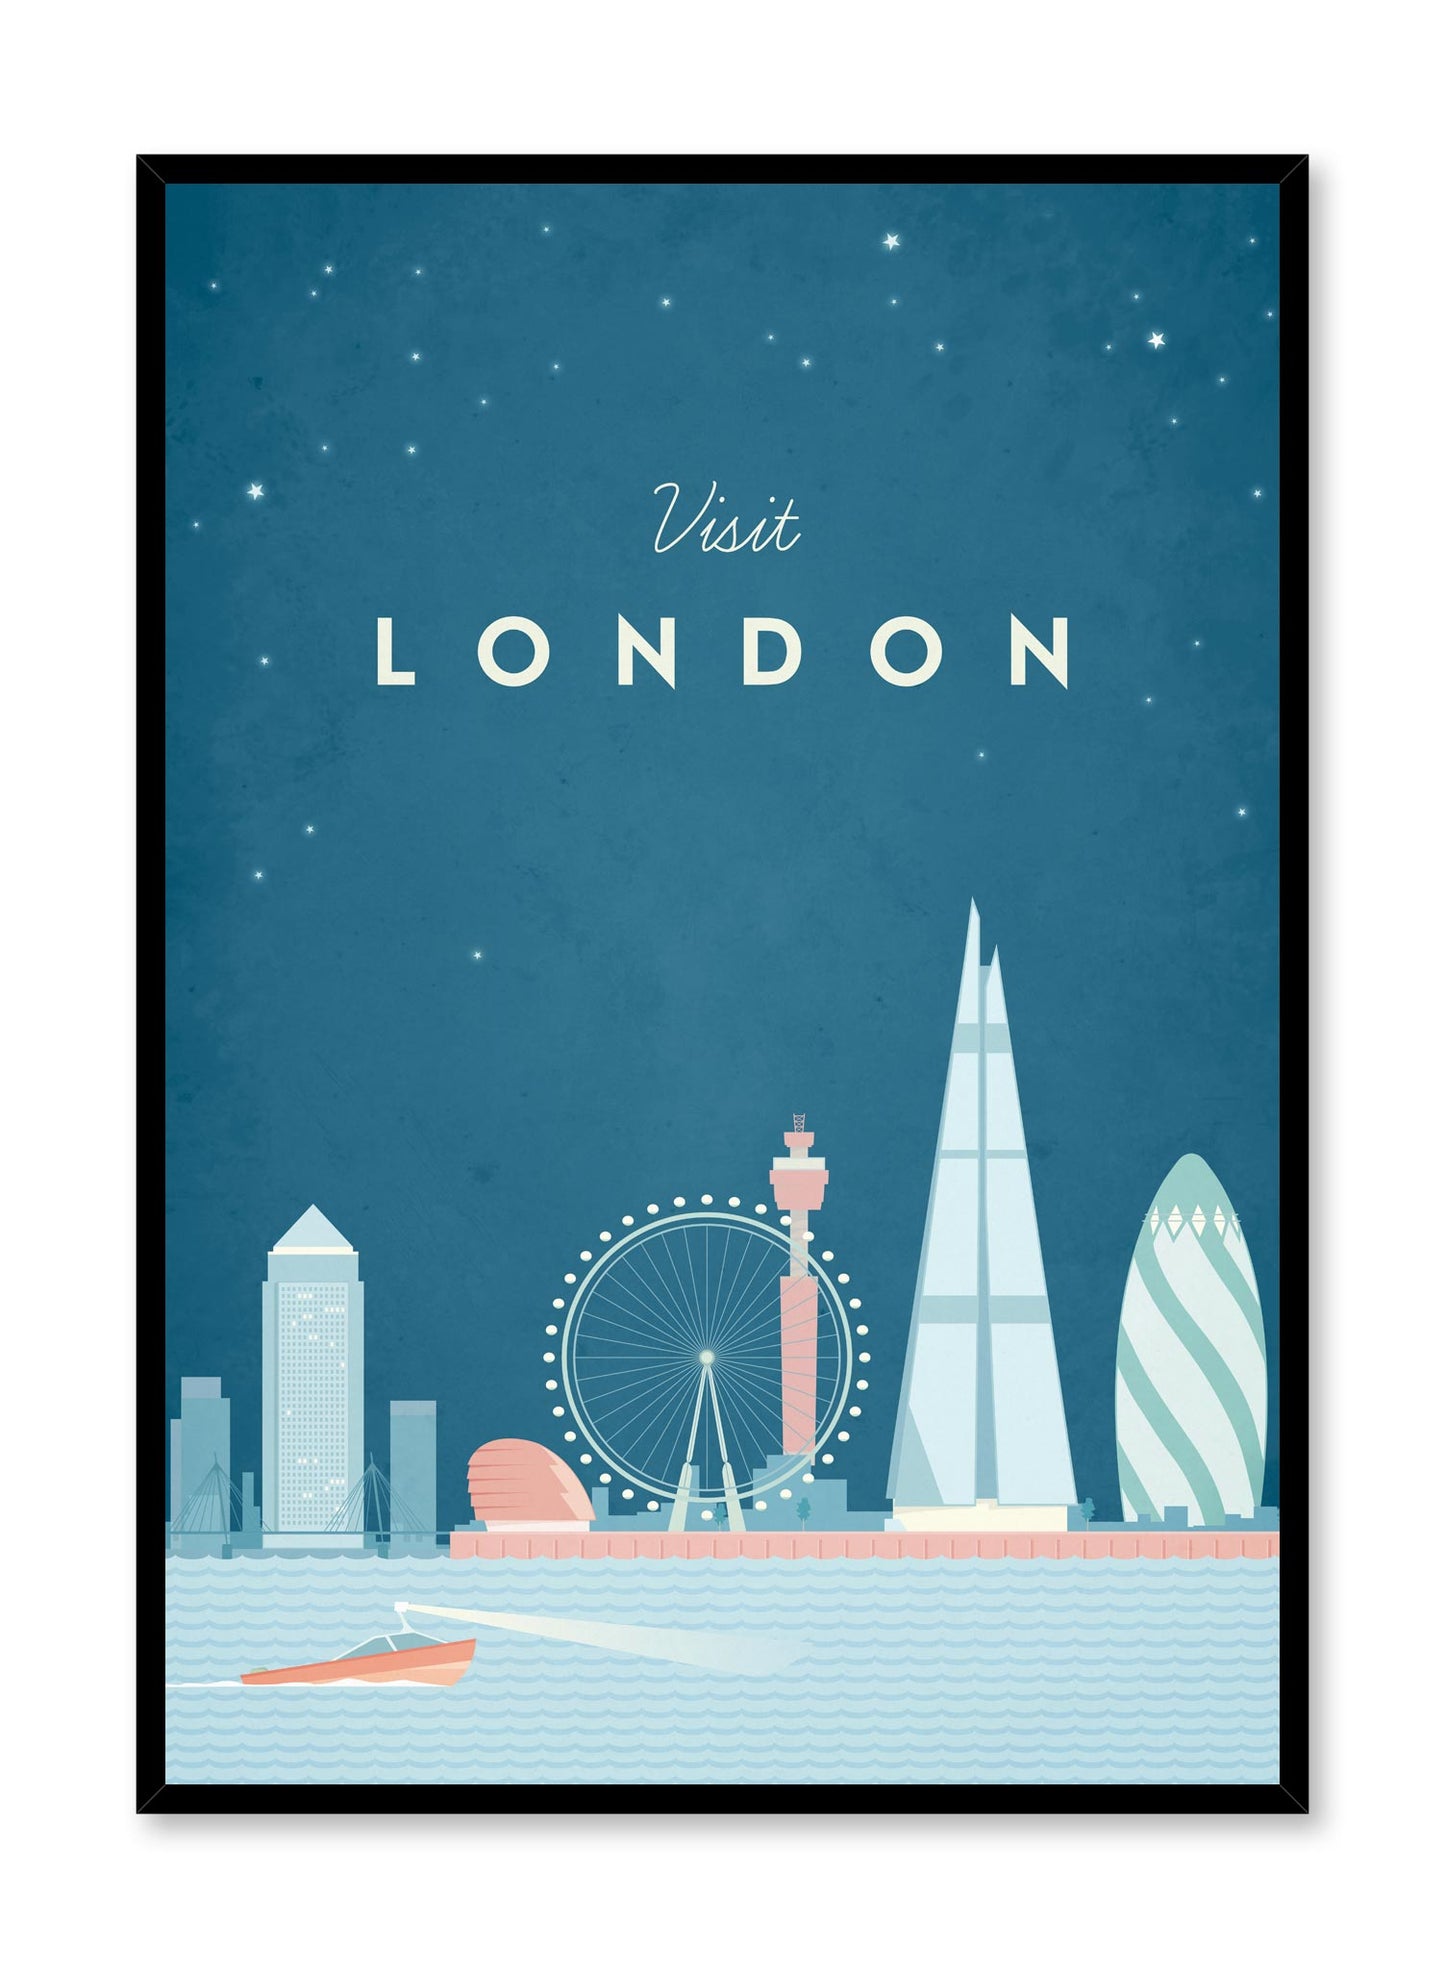 Modern minimalist travel poster by Opposite Wall with illustration of London